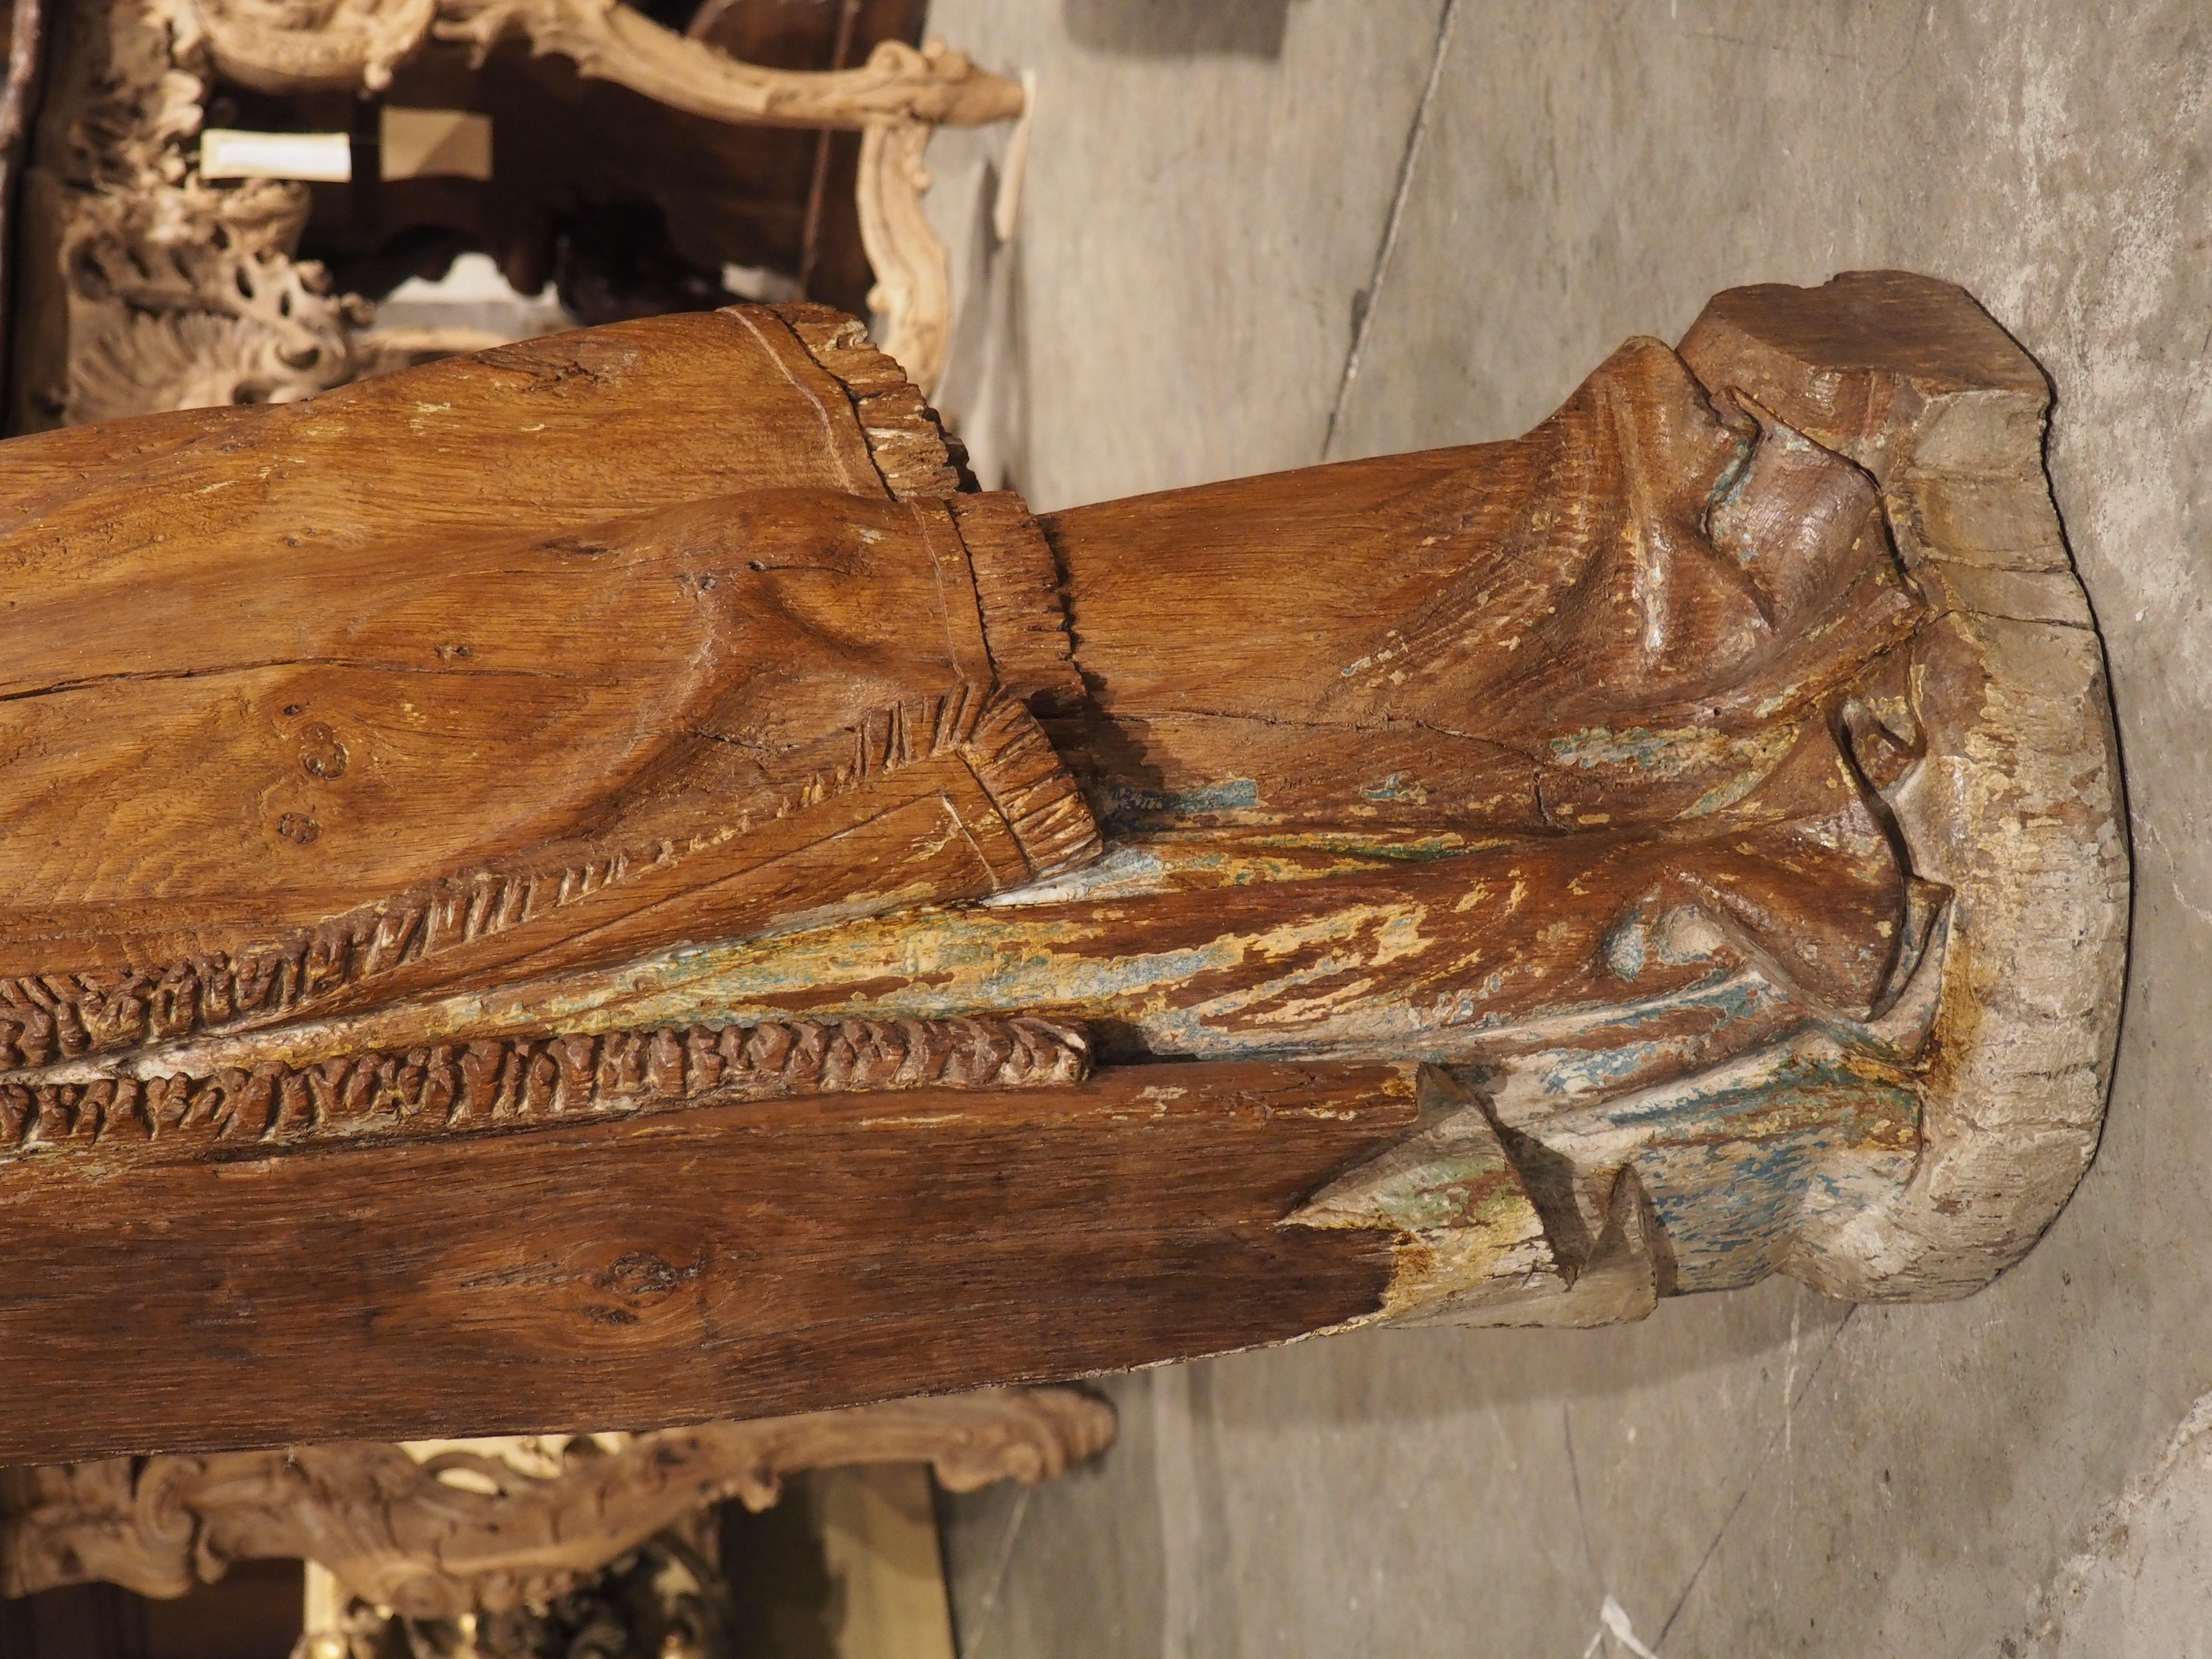 Large Carved Oak Statue of a Bishop, France, 17th Century For Sale 2